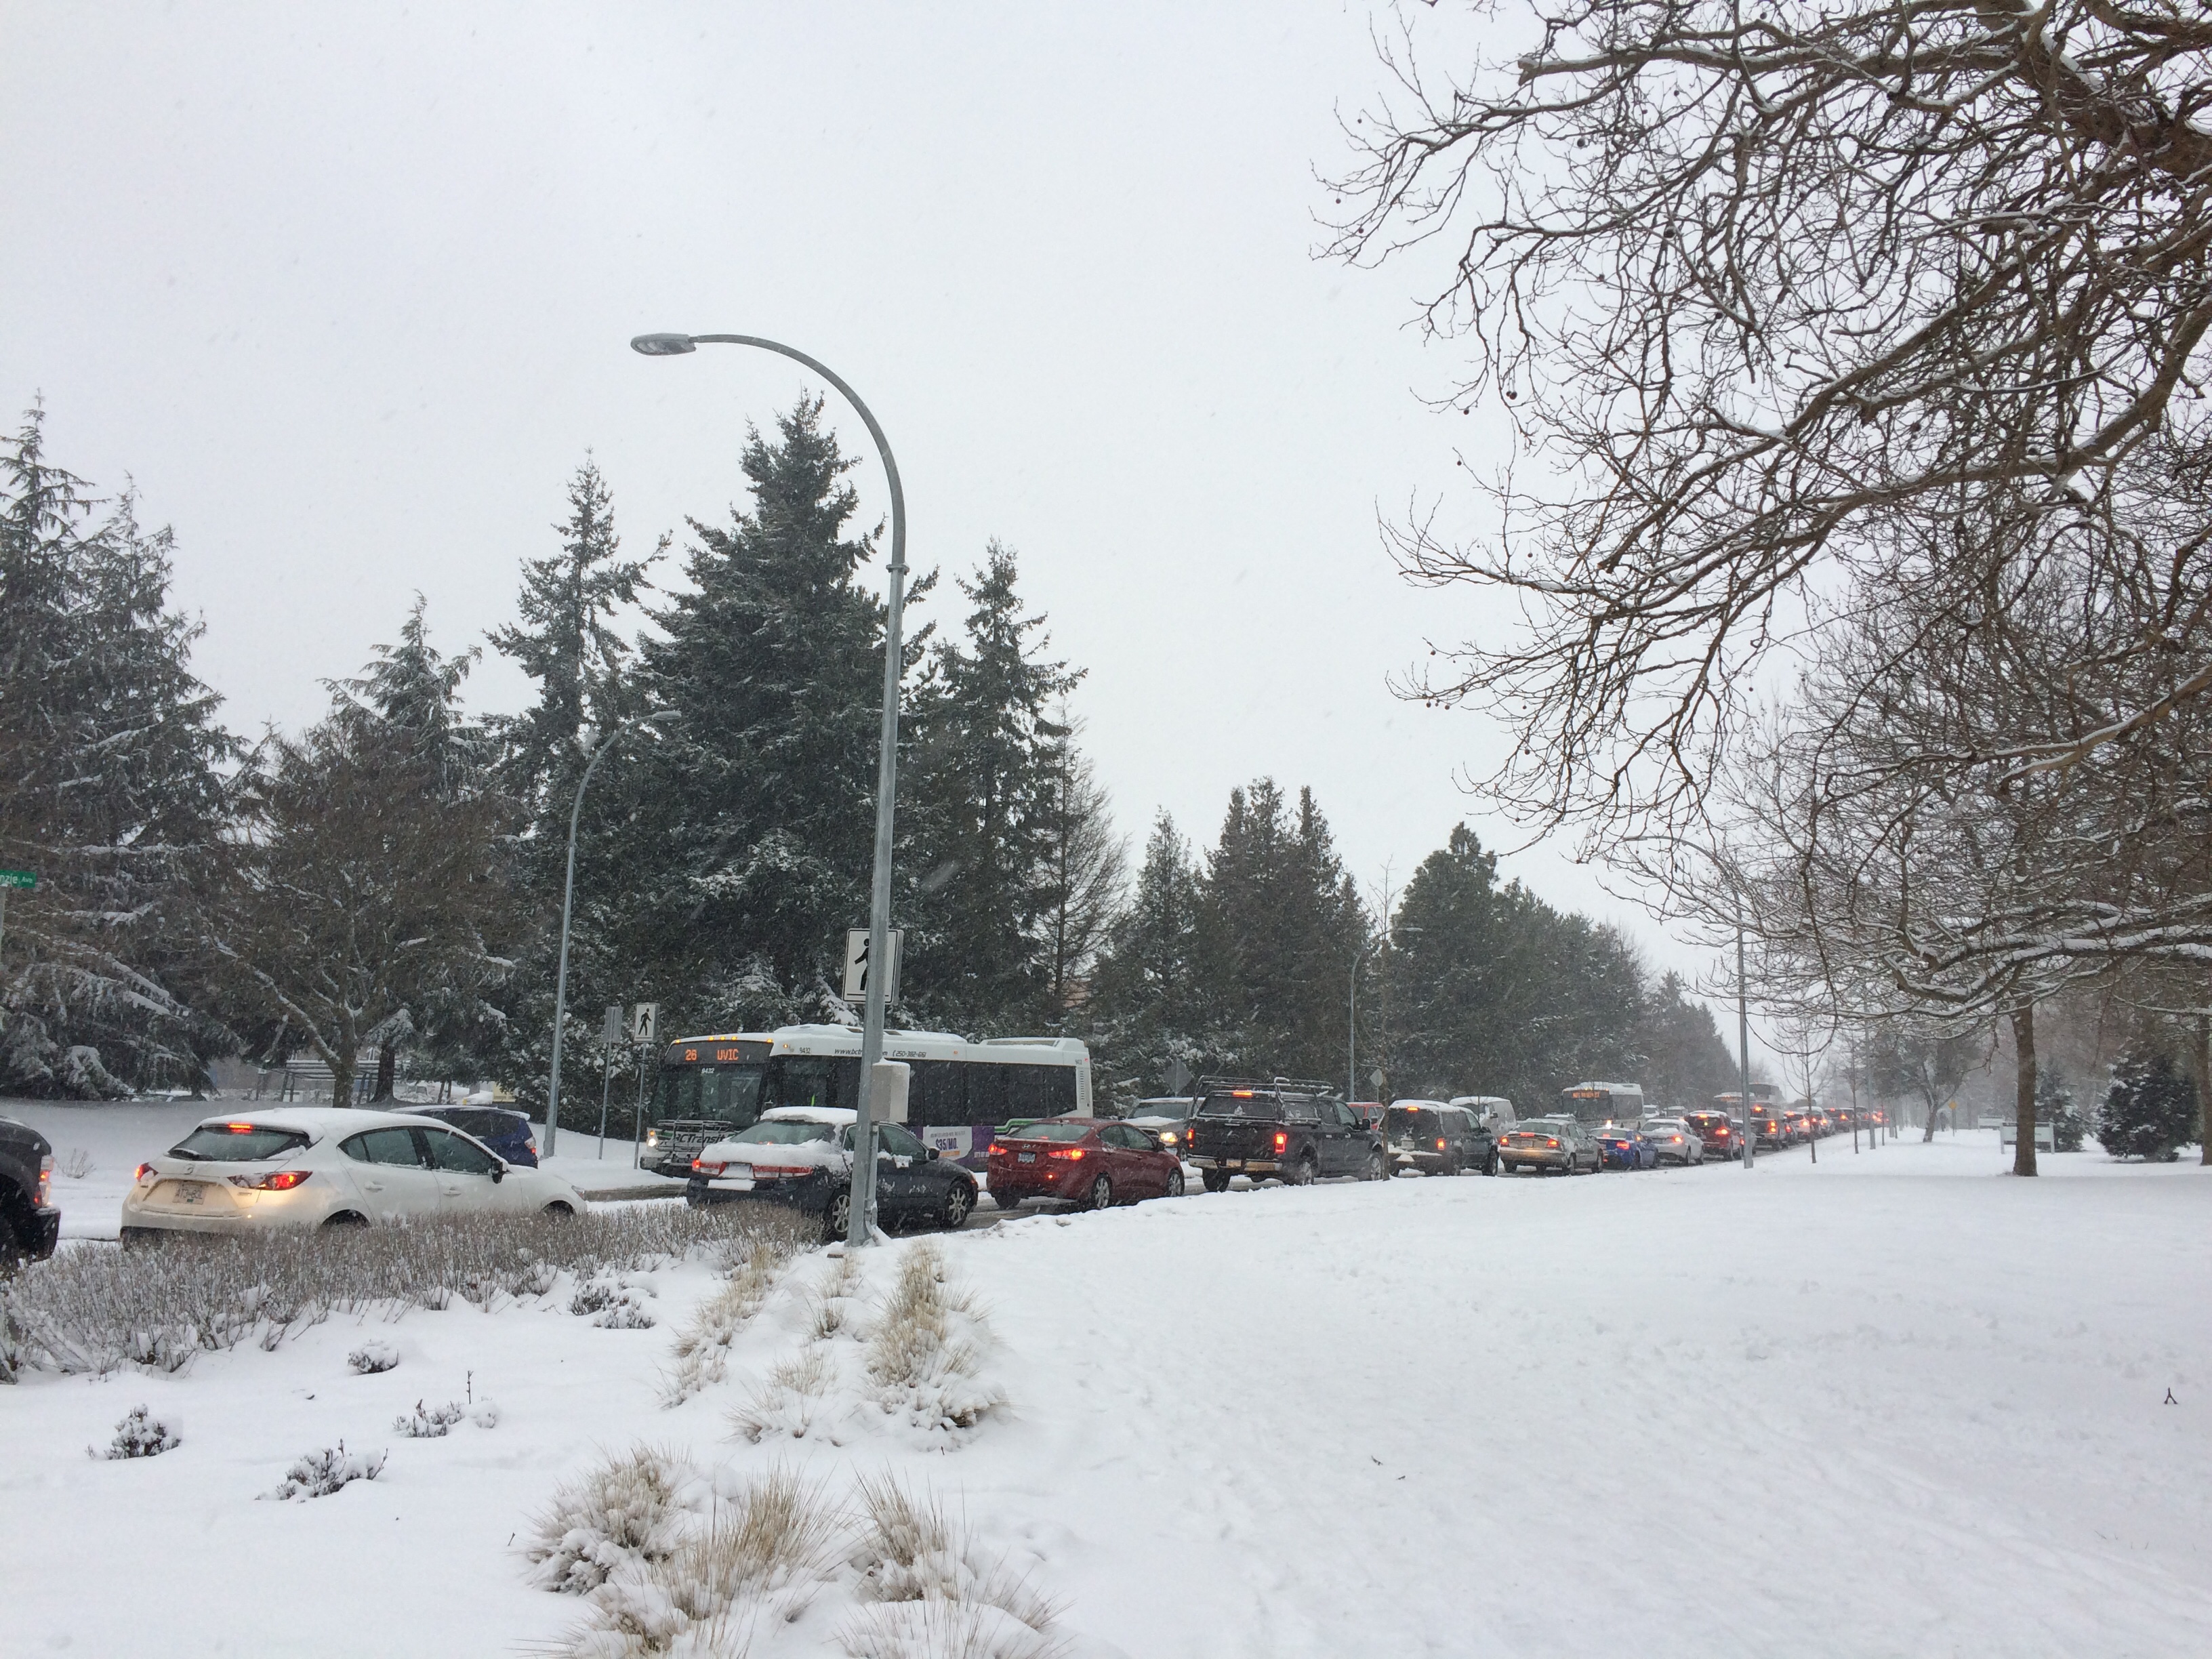 The extreme weather conditions prompted UVic to close campus, which then prompted this mess. Photo by Belle White, Photo Editor